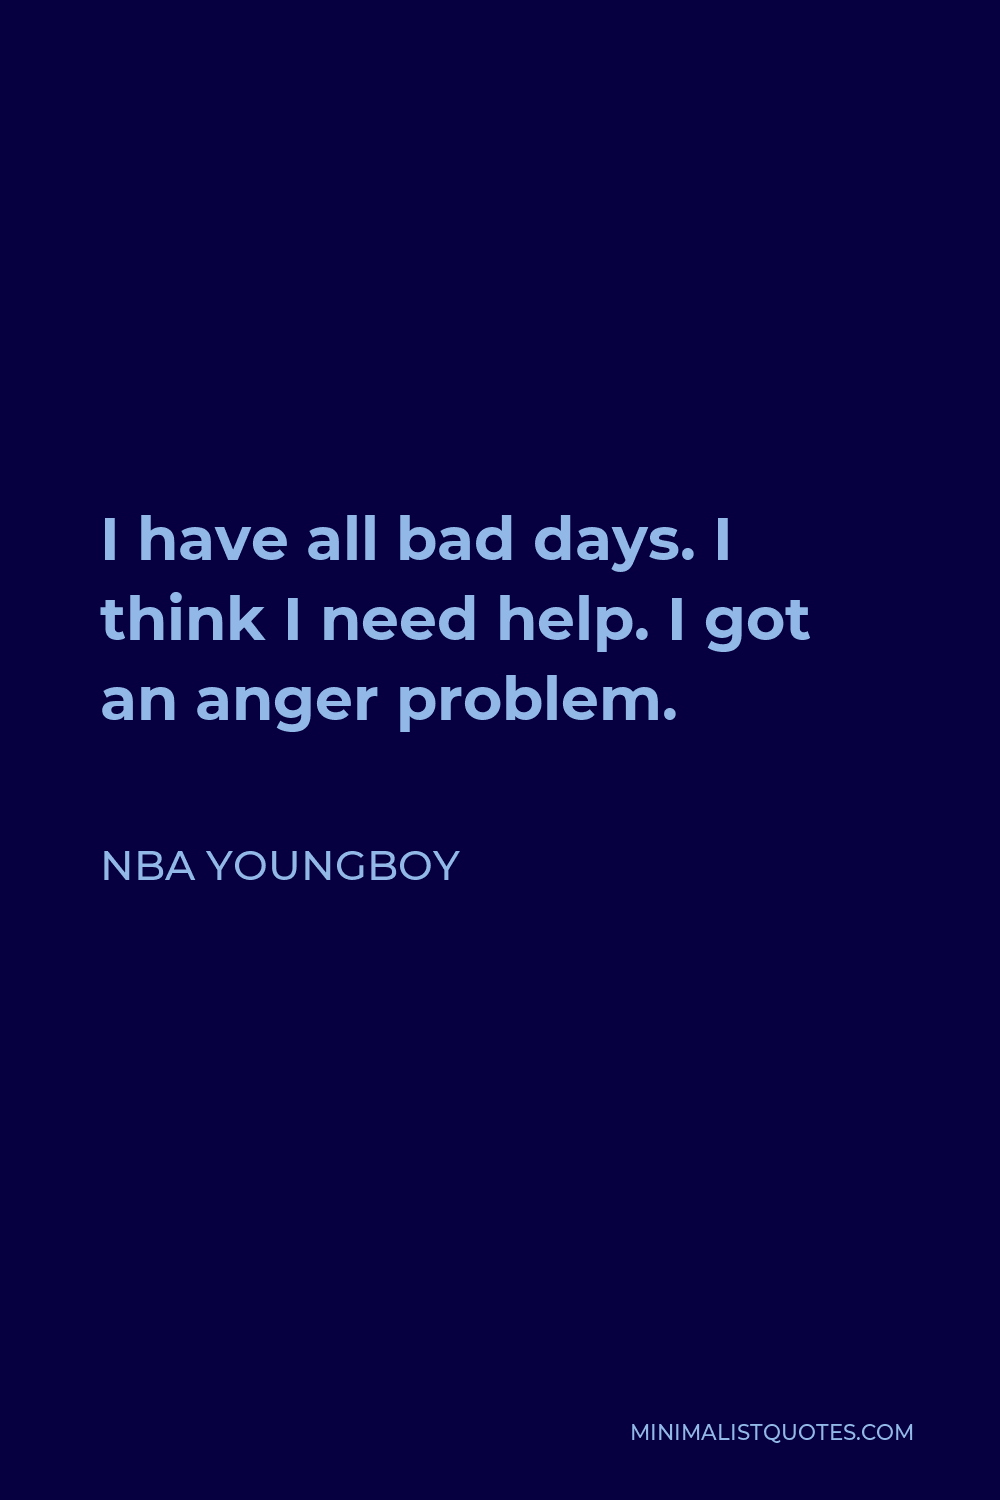 NBA Youngboy Quote - I have all bad days. I think I need help. I got an anger problem.